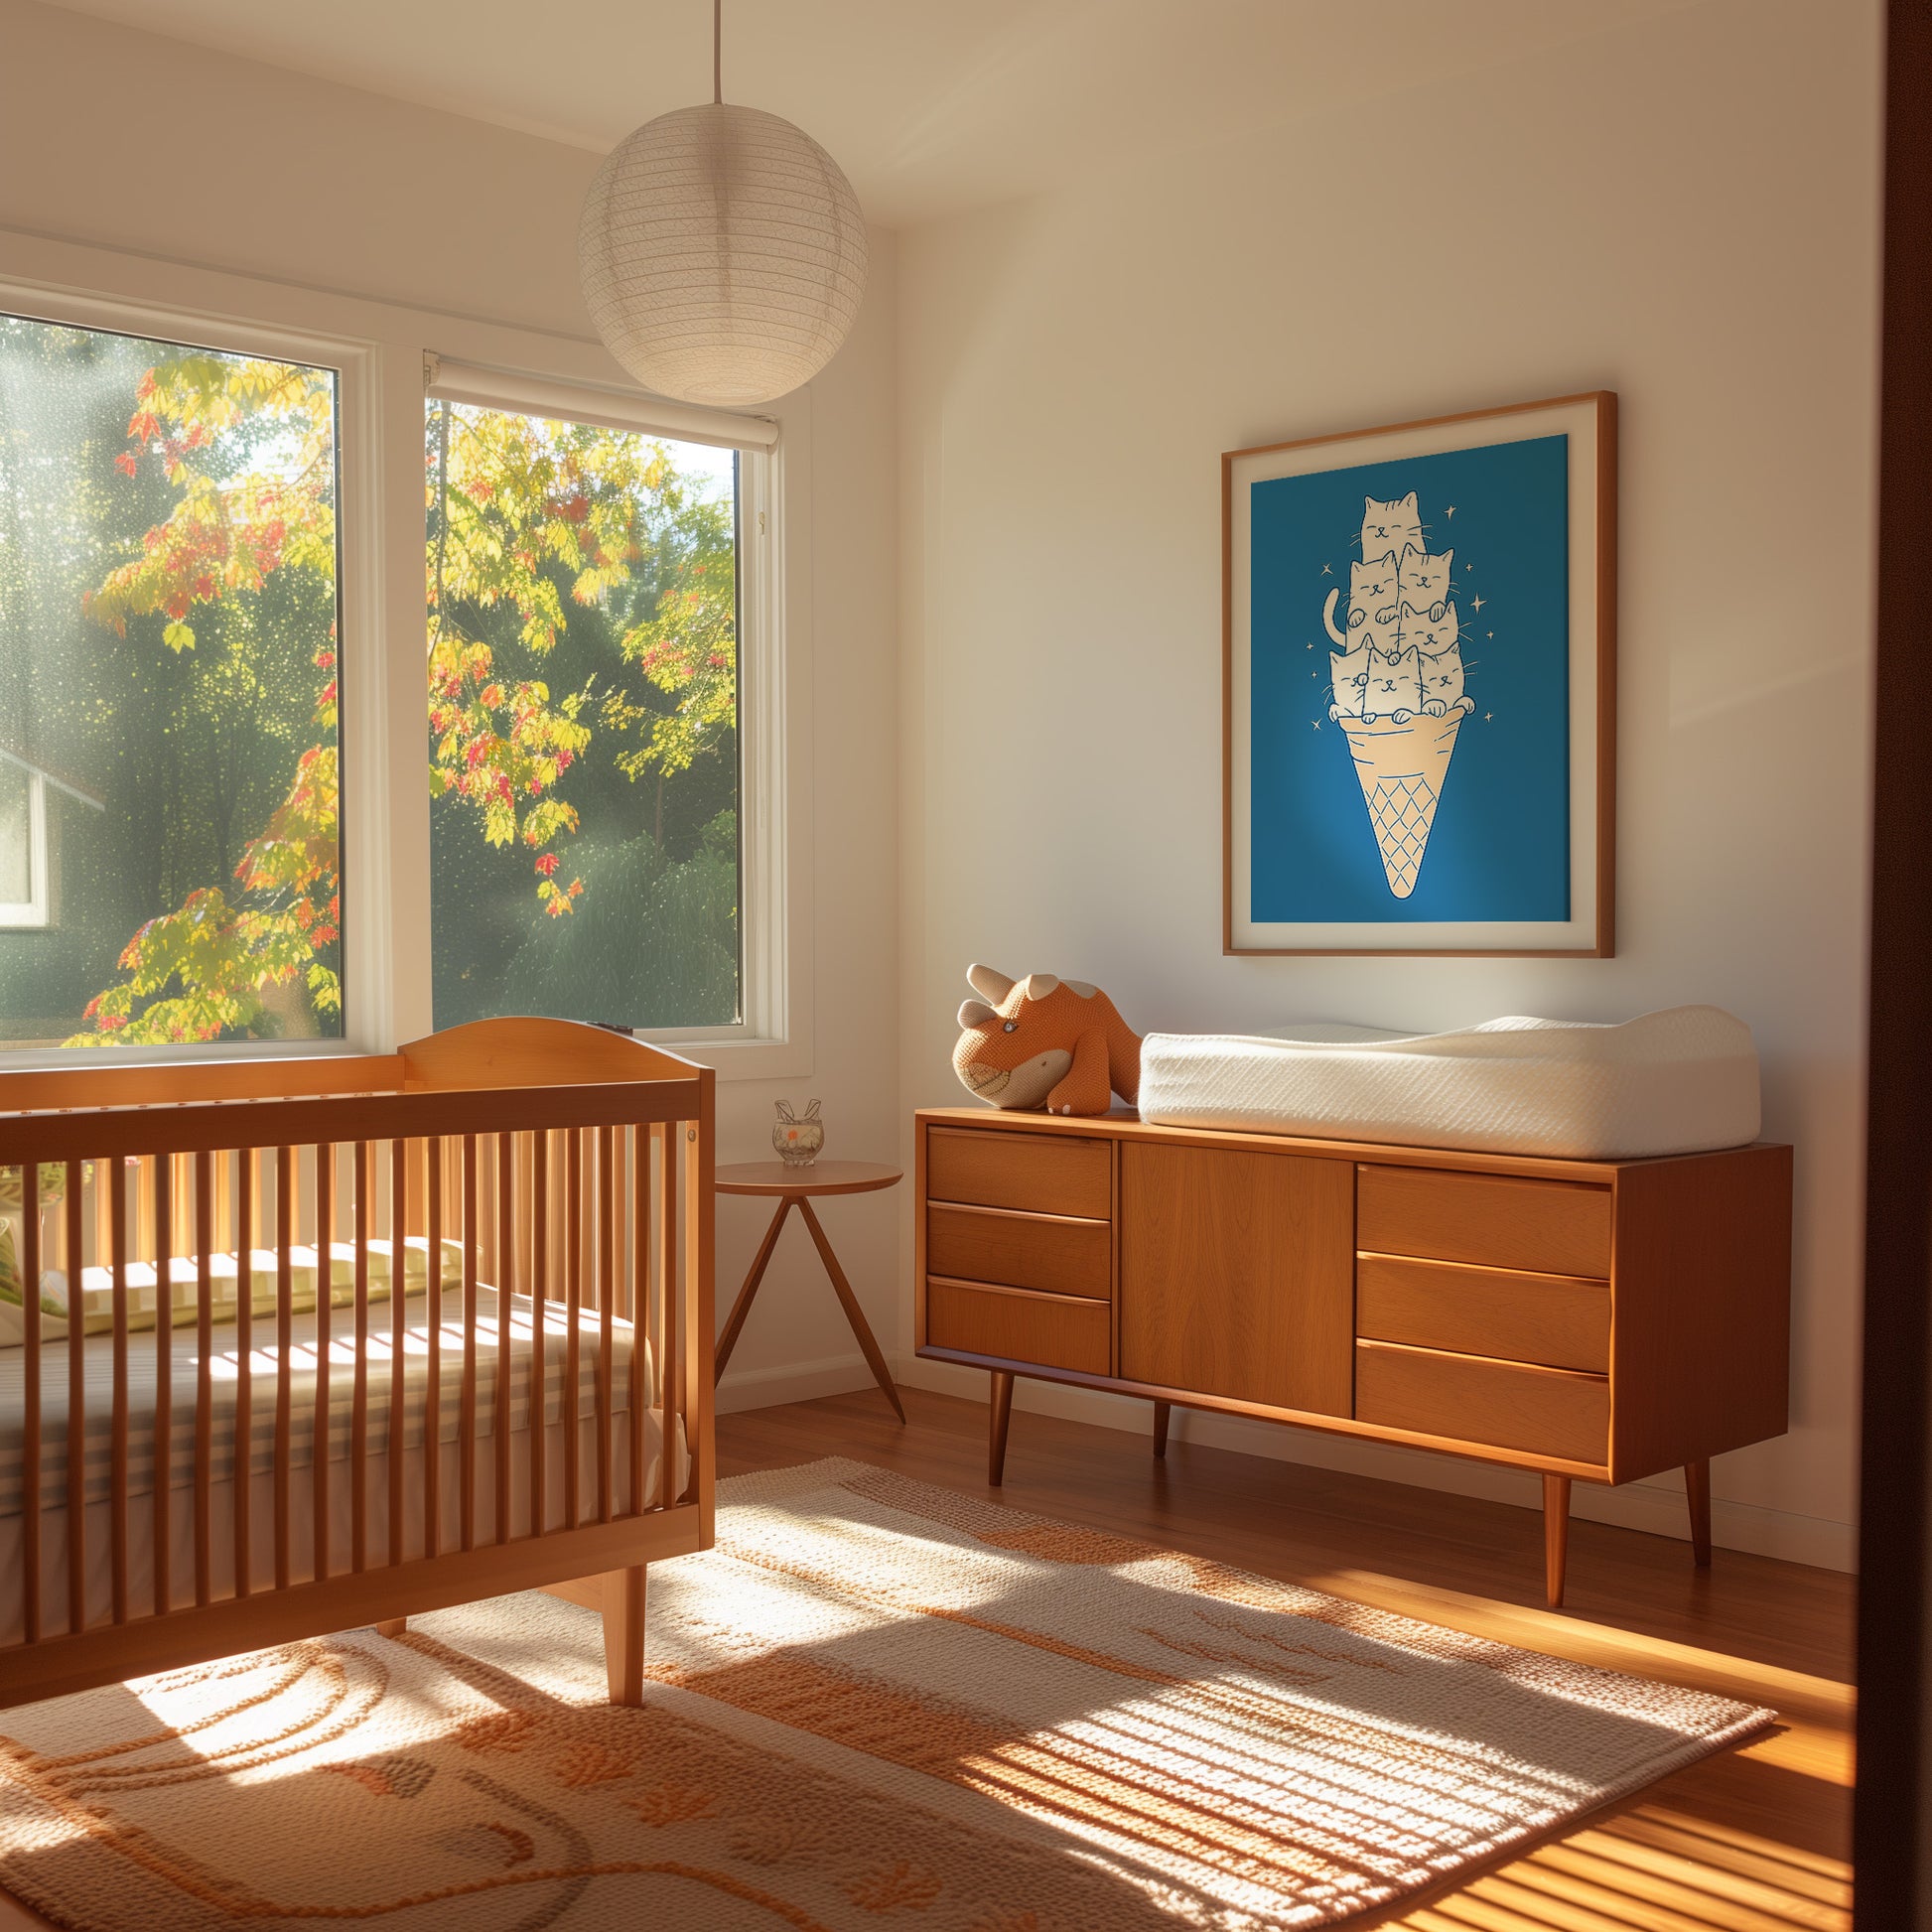 A cozy nursery room with a crib, dresser, and a colorful framed cat poster on the wall.